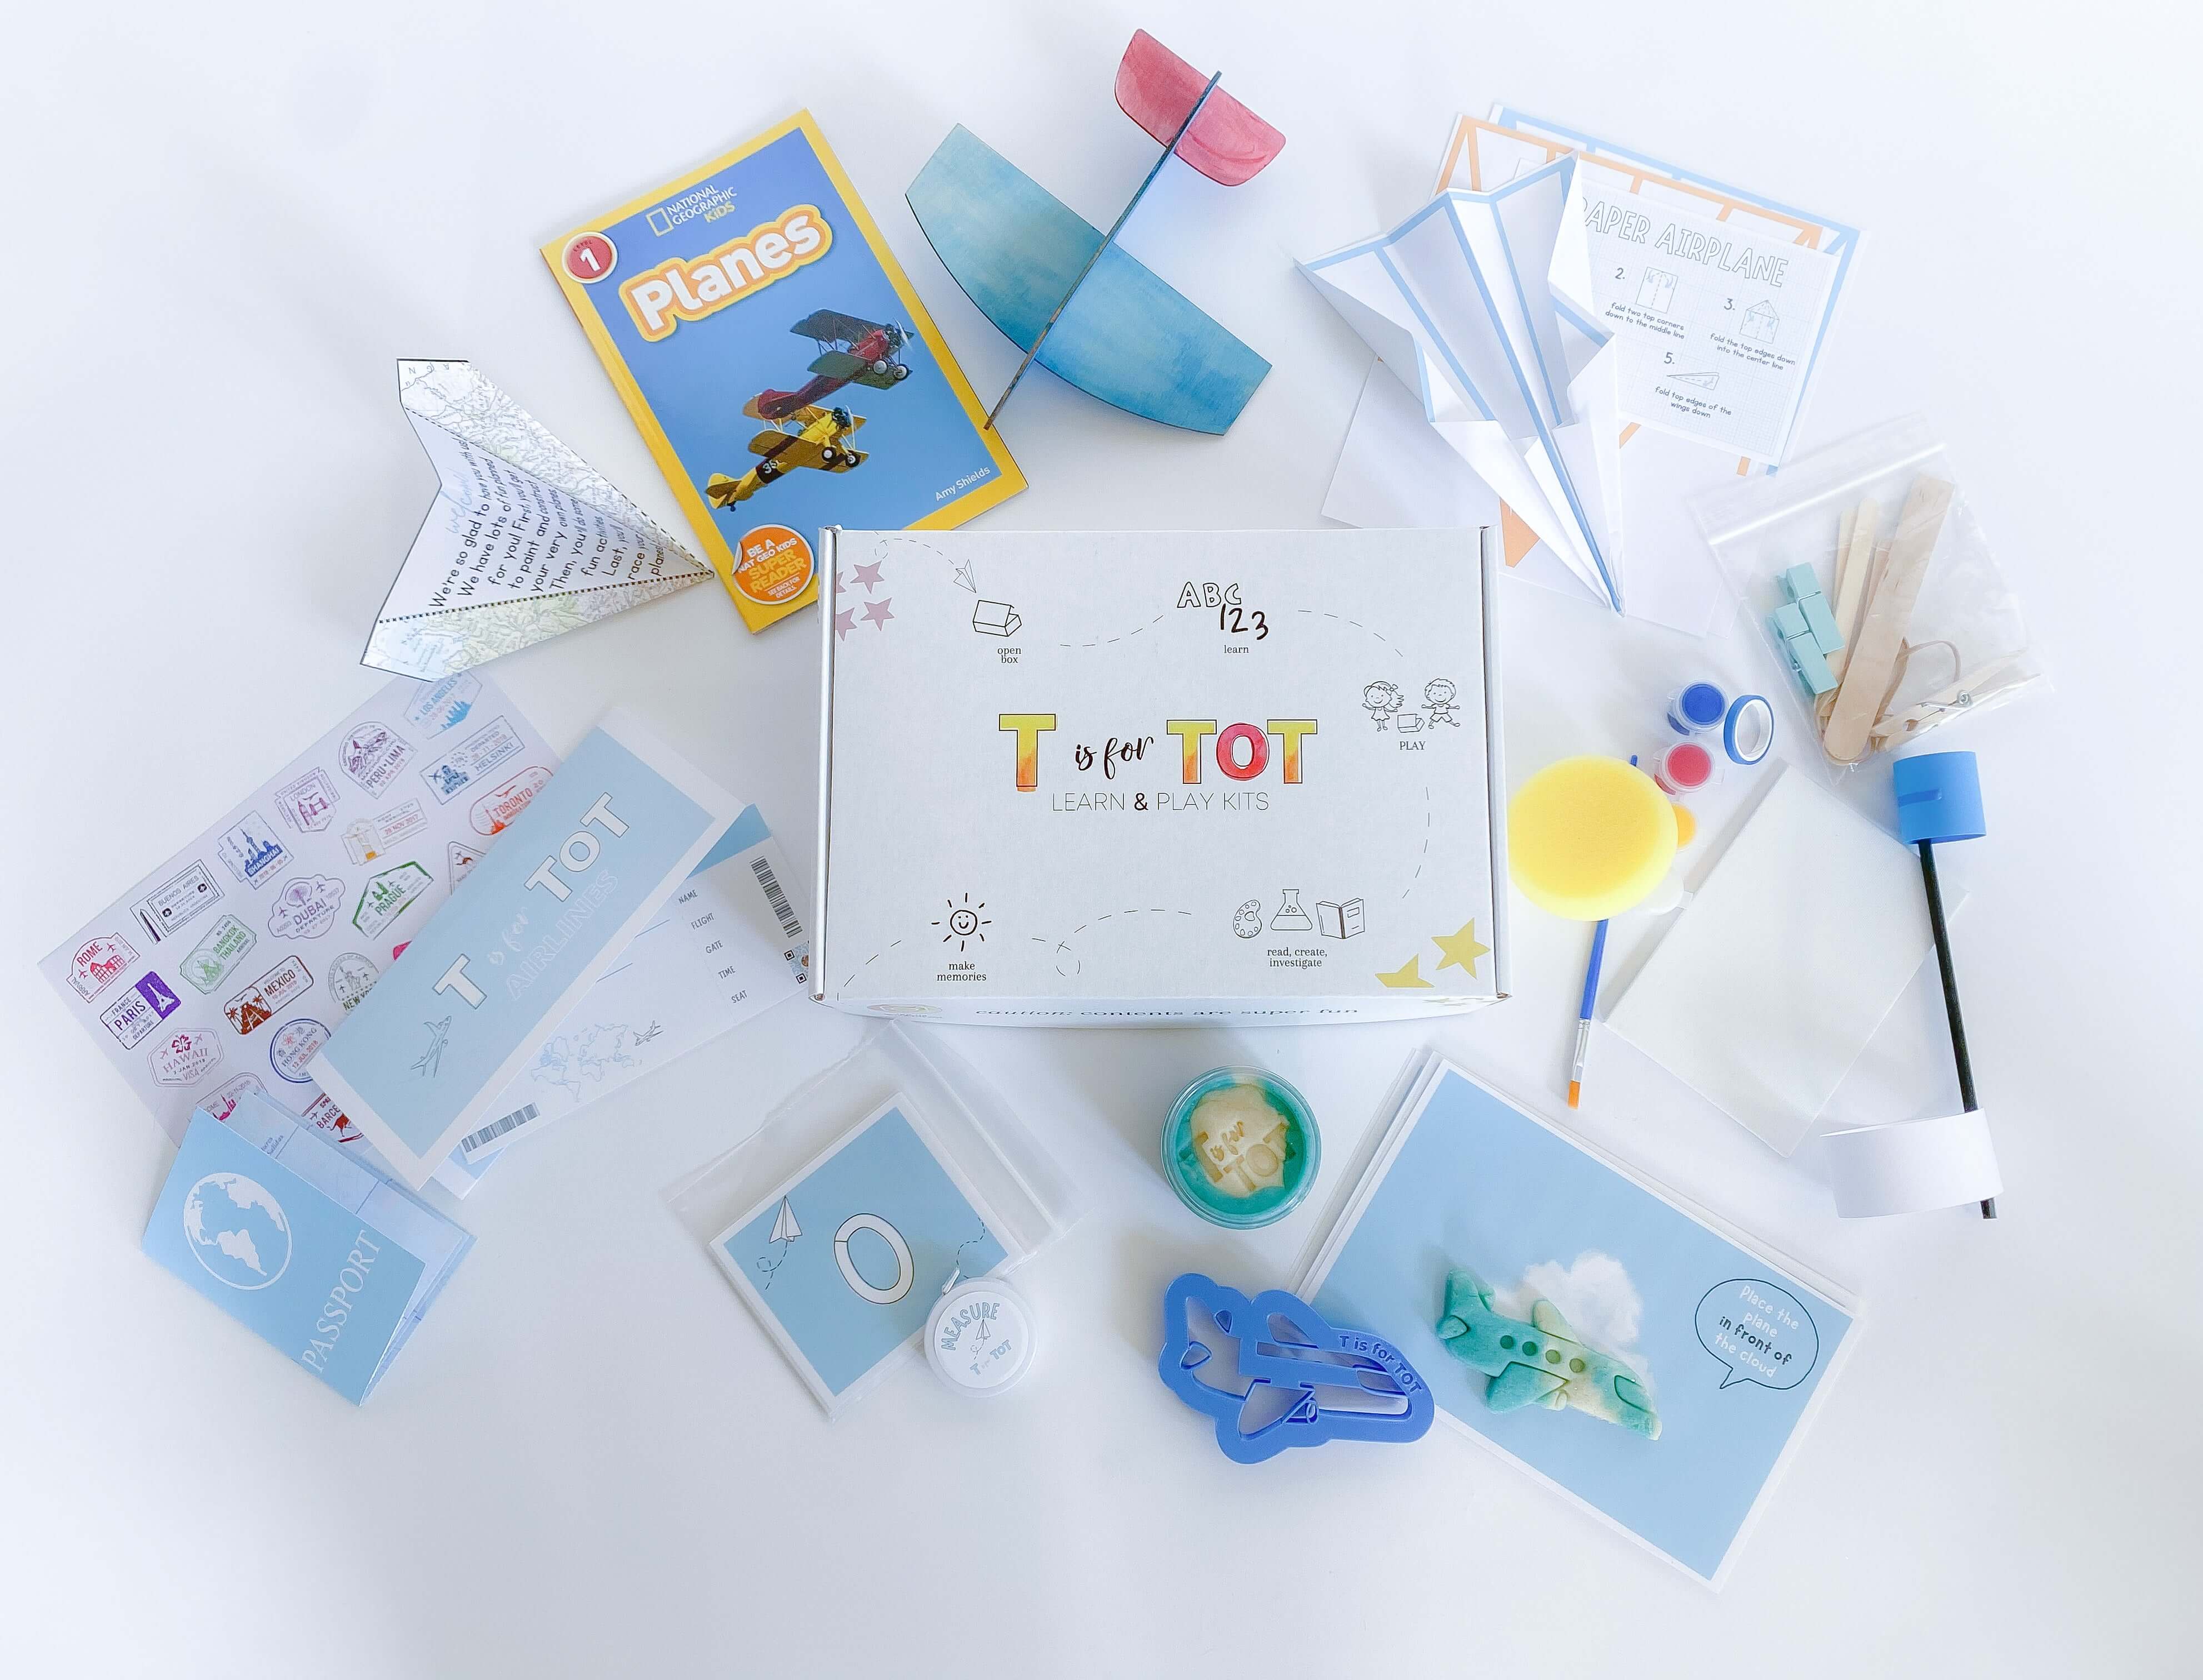 Interactive airplane kit for kids with playdough cutter, homemade playdough, paper airplane materials, wooden airplane crafting, straw airplane set, and pretend play items like pilot license, airplane tickets, and passport with stamp stickers.